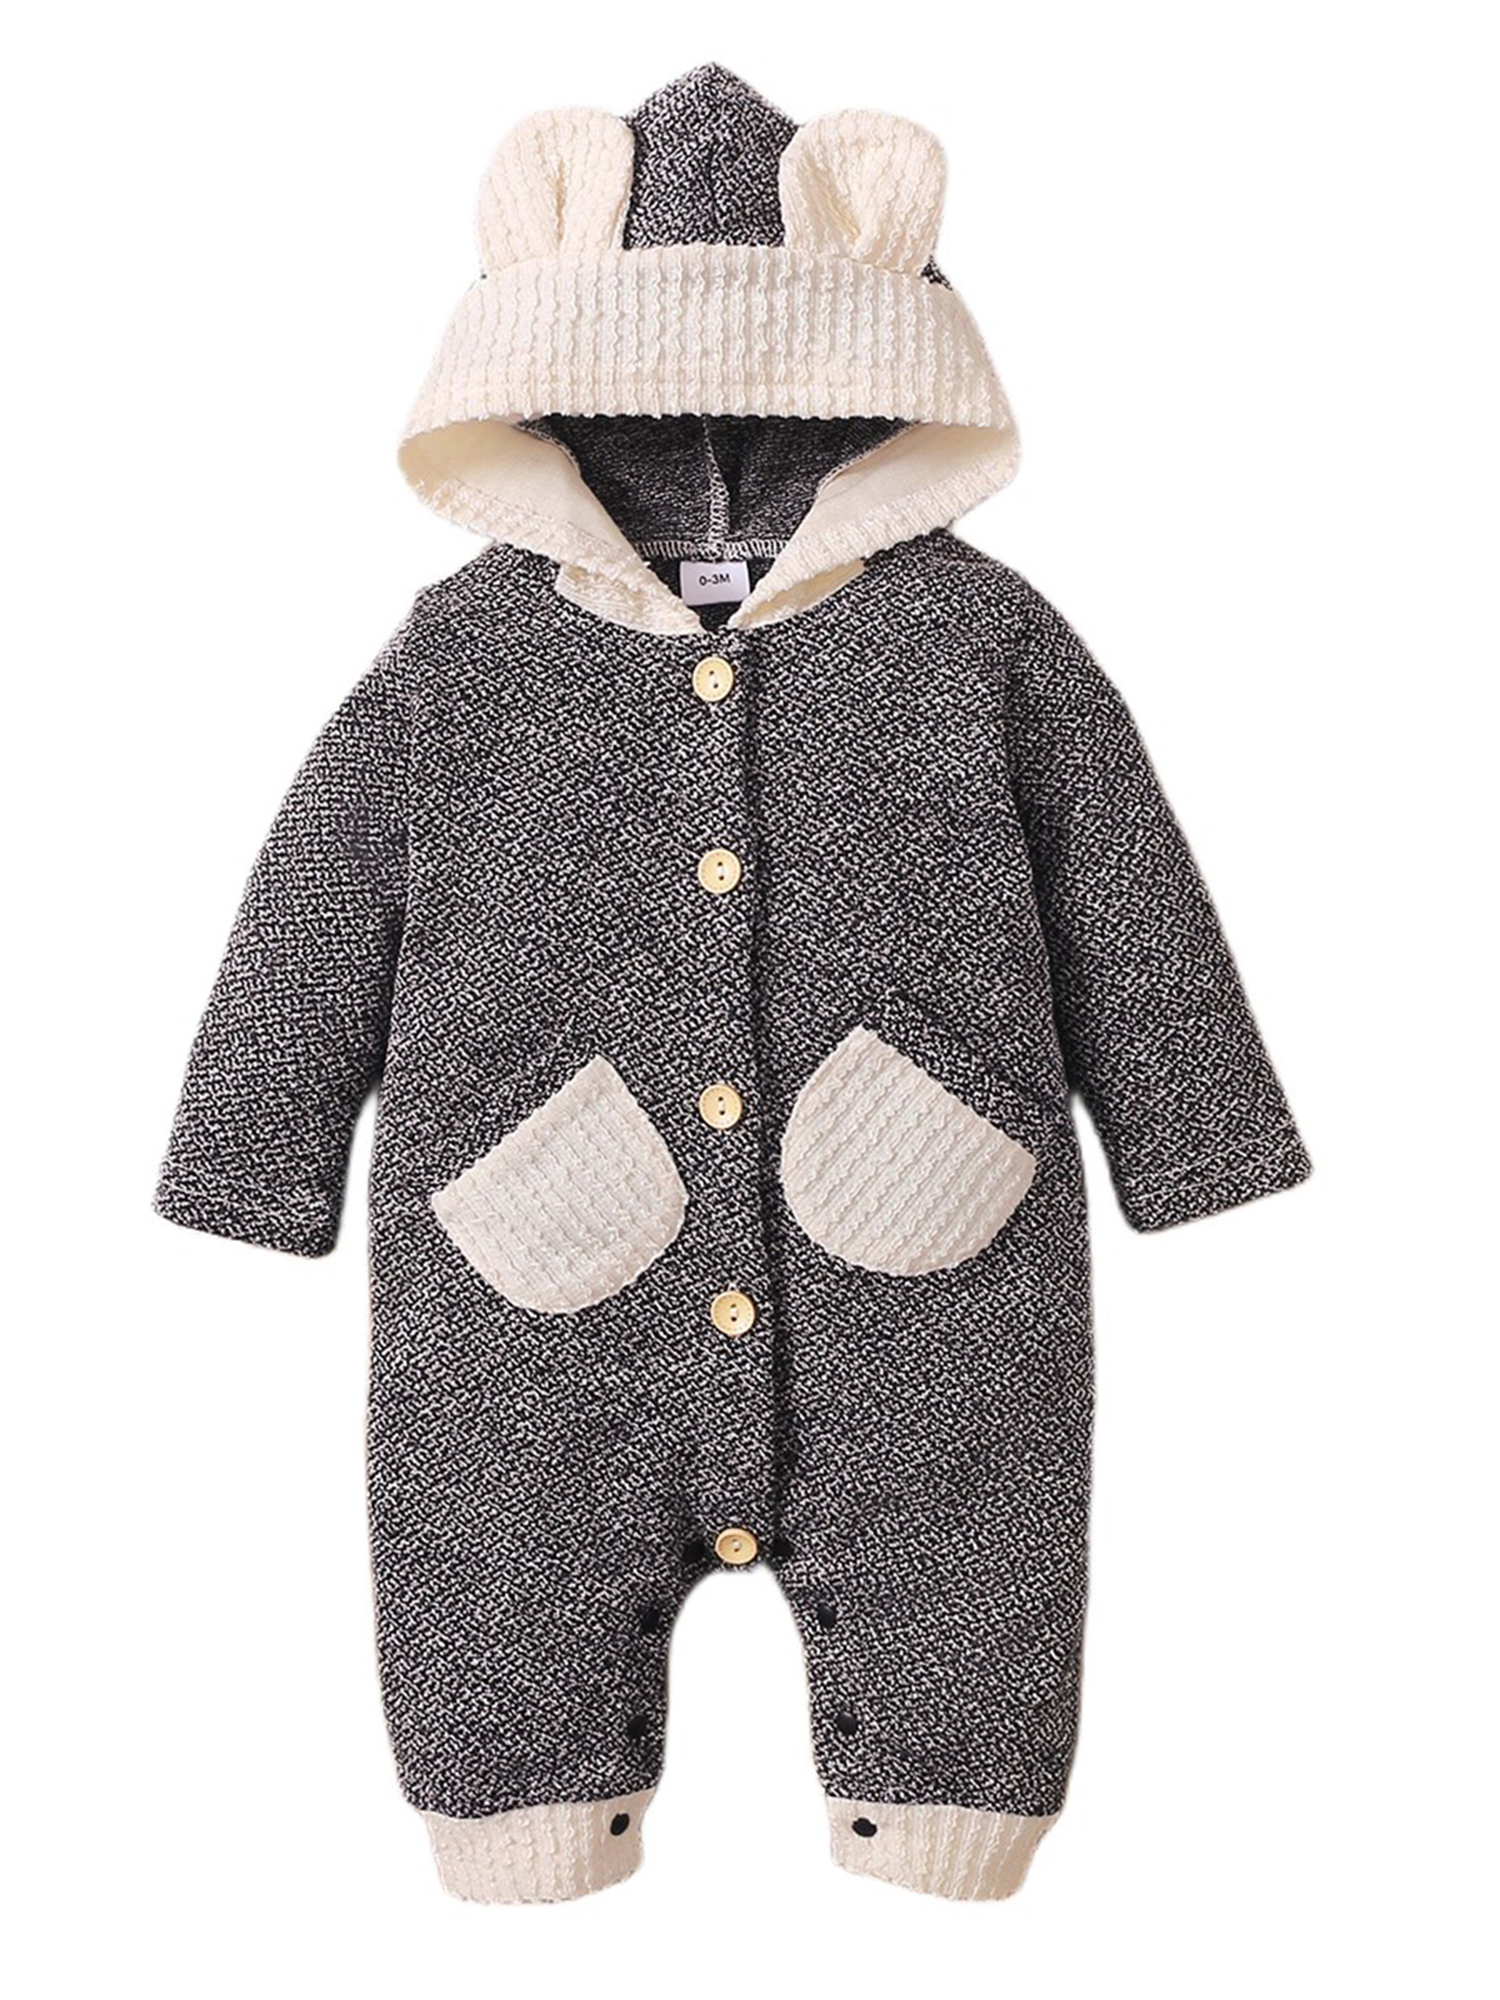 Thaisu Baby Jumpsuit, Long Sleeve Hooded Button Closure Knit Romper ...